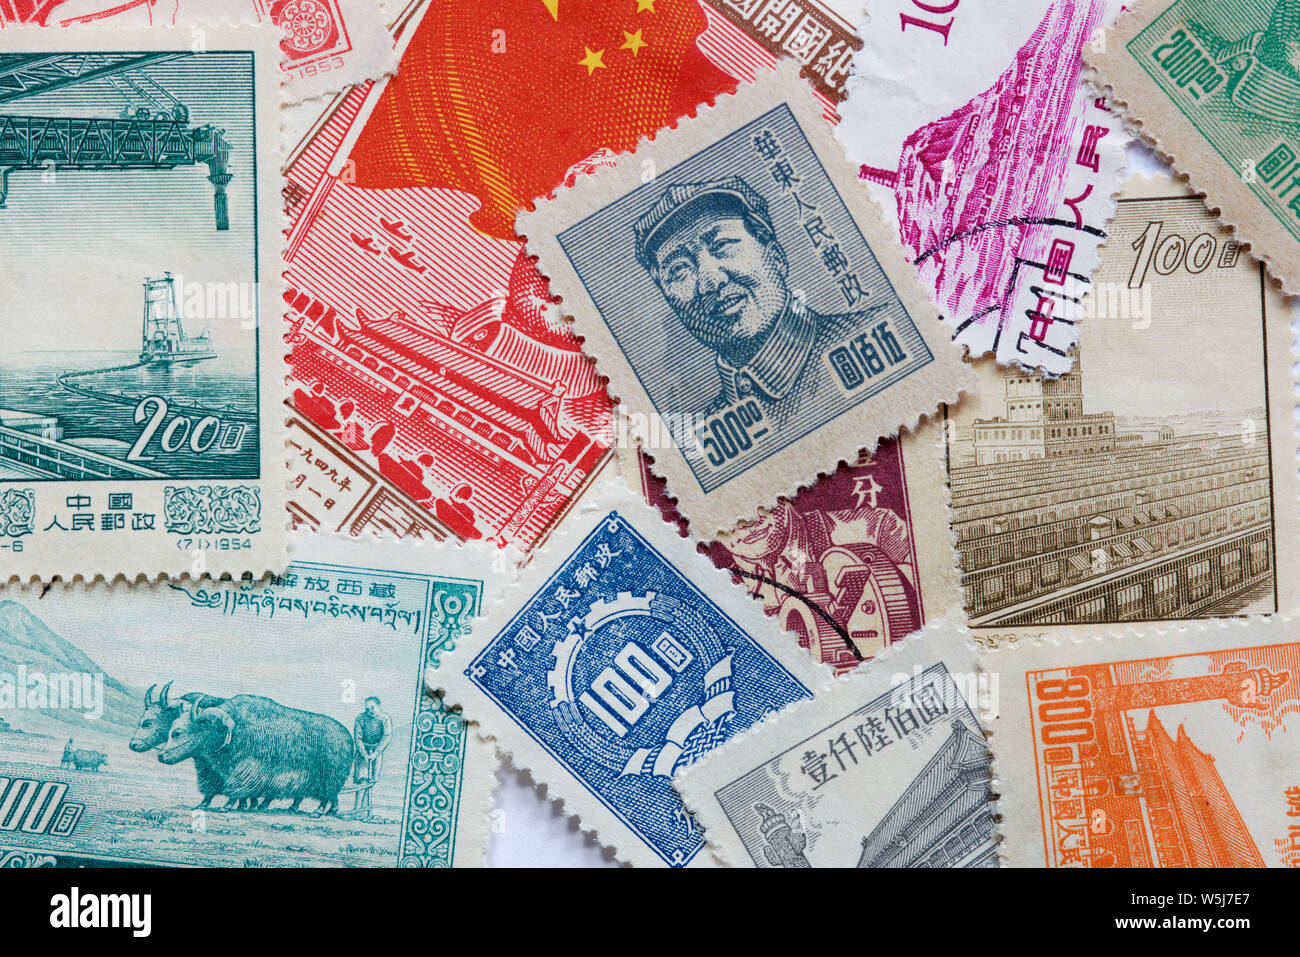 Various postage stamps from China Stock Photo - Alamy